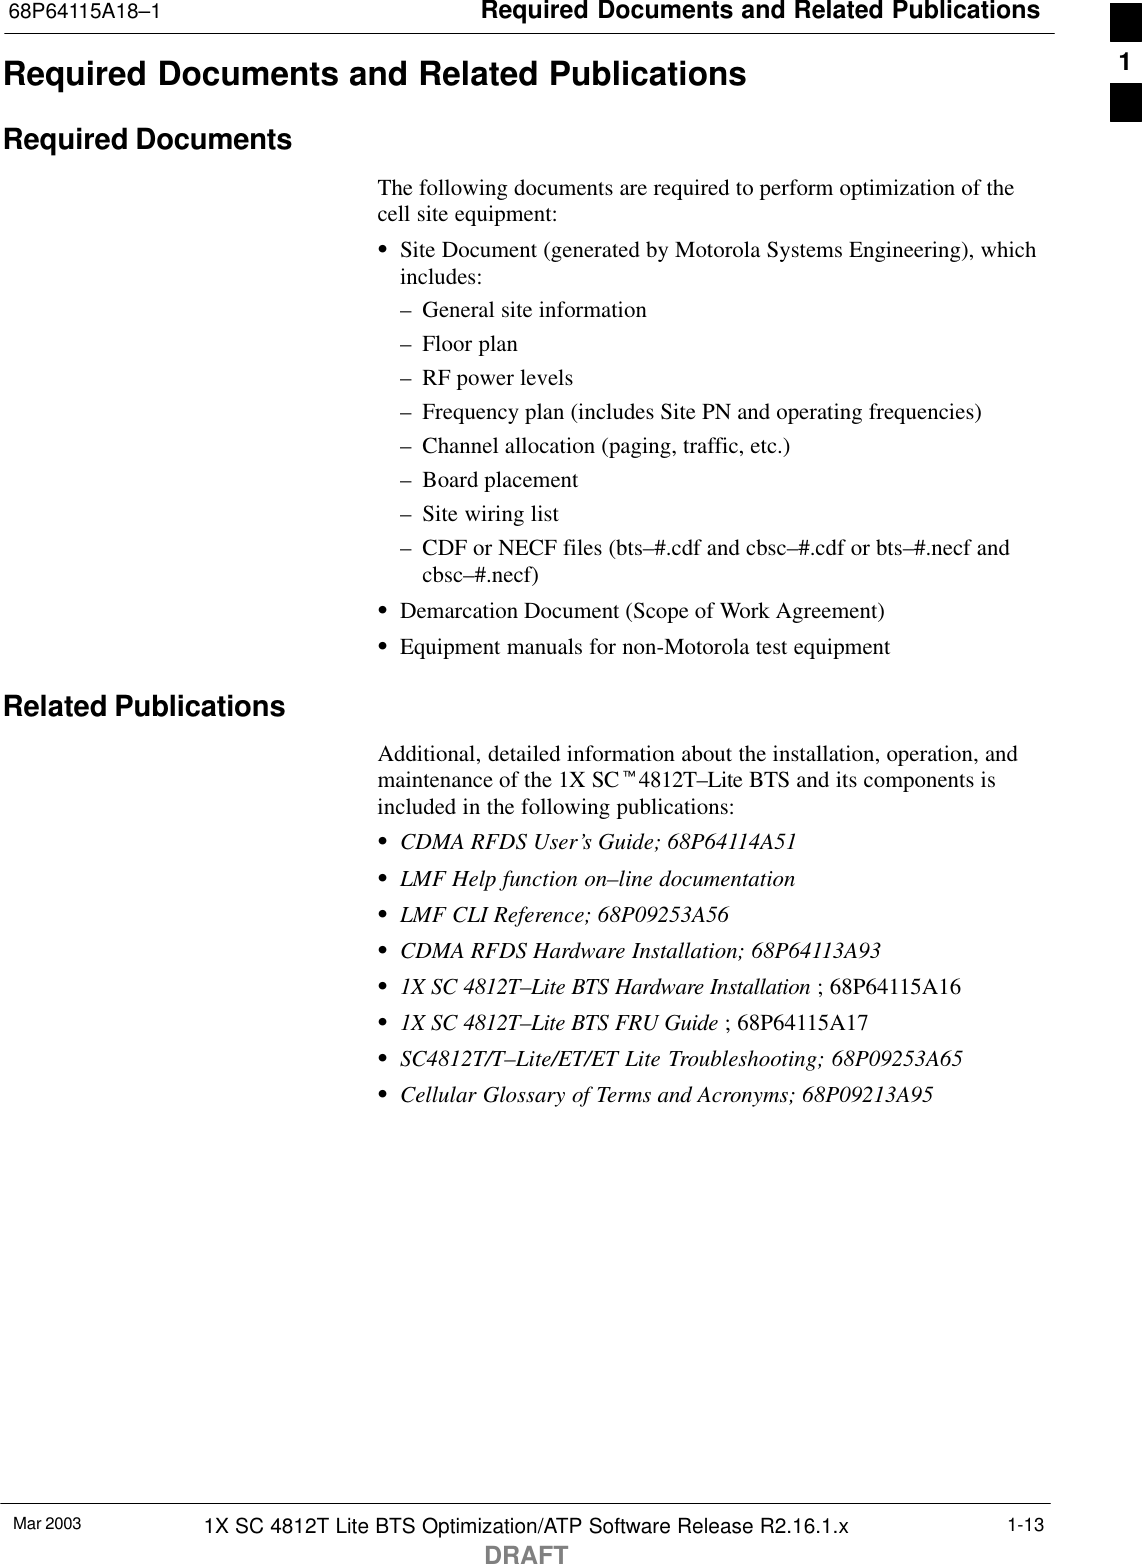 Required Documents and Related Publications68P64115A18–1Mar 2003 1X SC 4812T Lite BTS Optimization/ATP Software Release R2.16.1.xDRAFT1-13Required Documents and Related PublicationsRequired DocumentsThe following documents are required to perform optimization of thecell site equipment:SSite Document (generated by Motorola Systems Engineering), whichincludes:– General site information– Floor plan– RF power levels– Frequency plan (includes Site PN and operating frequencies)– Channel allocation (paging, traffic, etc.)– Board placement– Site wiring list– CDF or NECF files (bts–#.cdf and cbsc–#.cdf or bts–#.necf andcbsc–#.necf)SDemarcation Document (Scope of Work Agreement)SEquipment manuals for non-Motorola test equipmentRelated PublicationsAdditional, detailed information about the installation, operation, andmaintenance of the 1X SCt4812T–Lite BTS and its components isincluded in the following publications:SCDMA RFDS User’s Guide; 68P64114A51SLMF Help function on–line documentationSLMF CLI Reference; 68P09253A56SCDMA RFDS Hardware Installation; 68P64113A93S1X SC 4812T–Lite BTS Hardware Installation ; 68P64115A16S1X SC 4812T–Lite BTS FRU Guide ; 68P64115A17SSC4812T/T–Lite/ET/ET Lite Troubleshooting; 68P09253A65SCellular Glossary of Terms and Acronyms; 68P09213A951